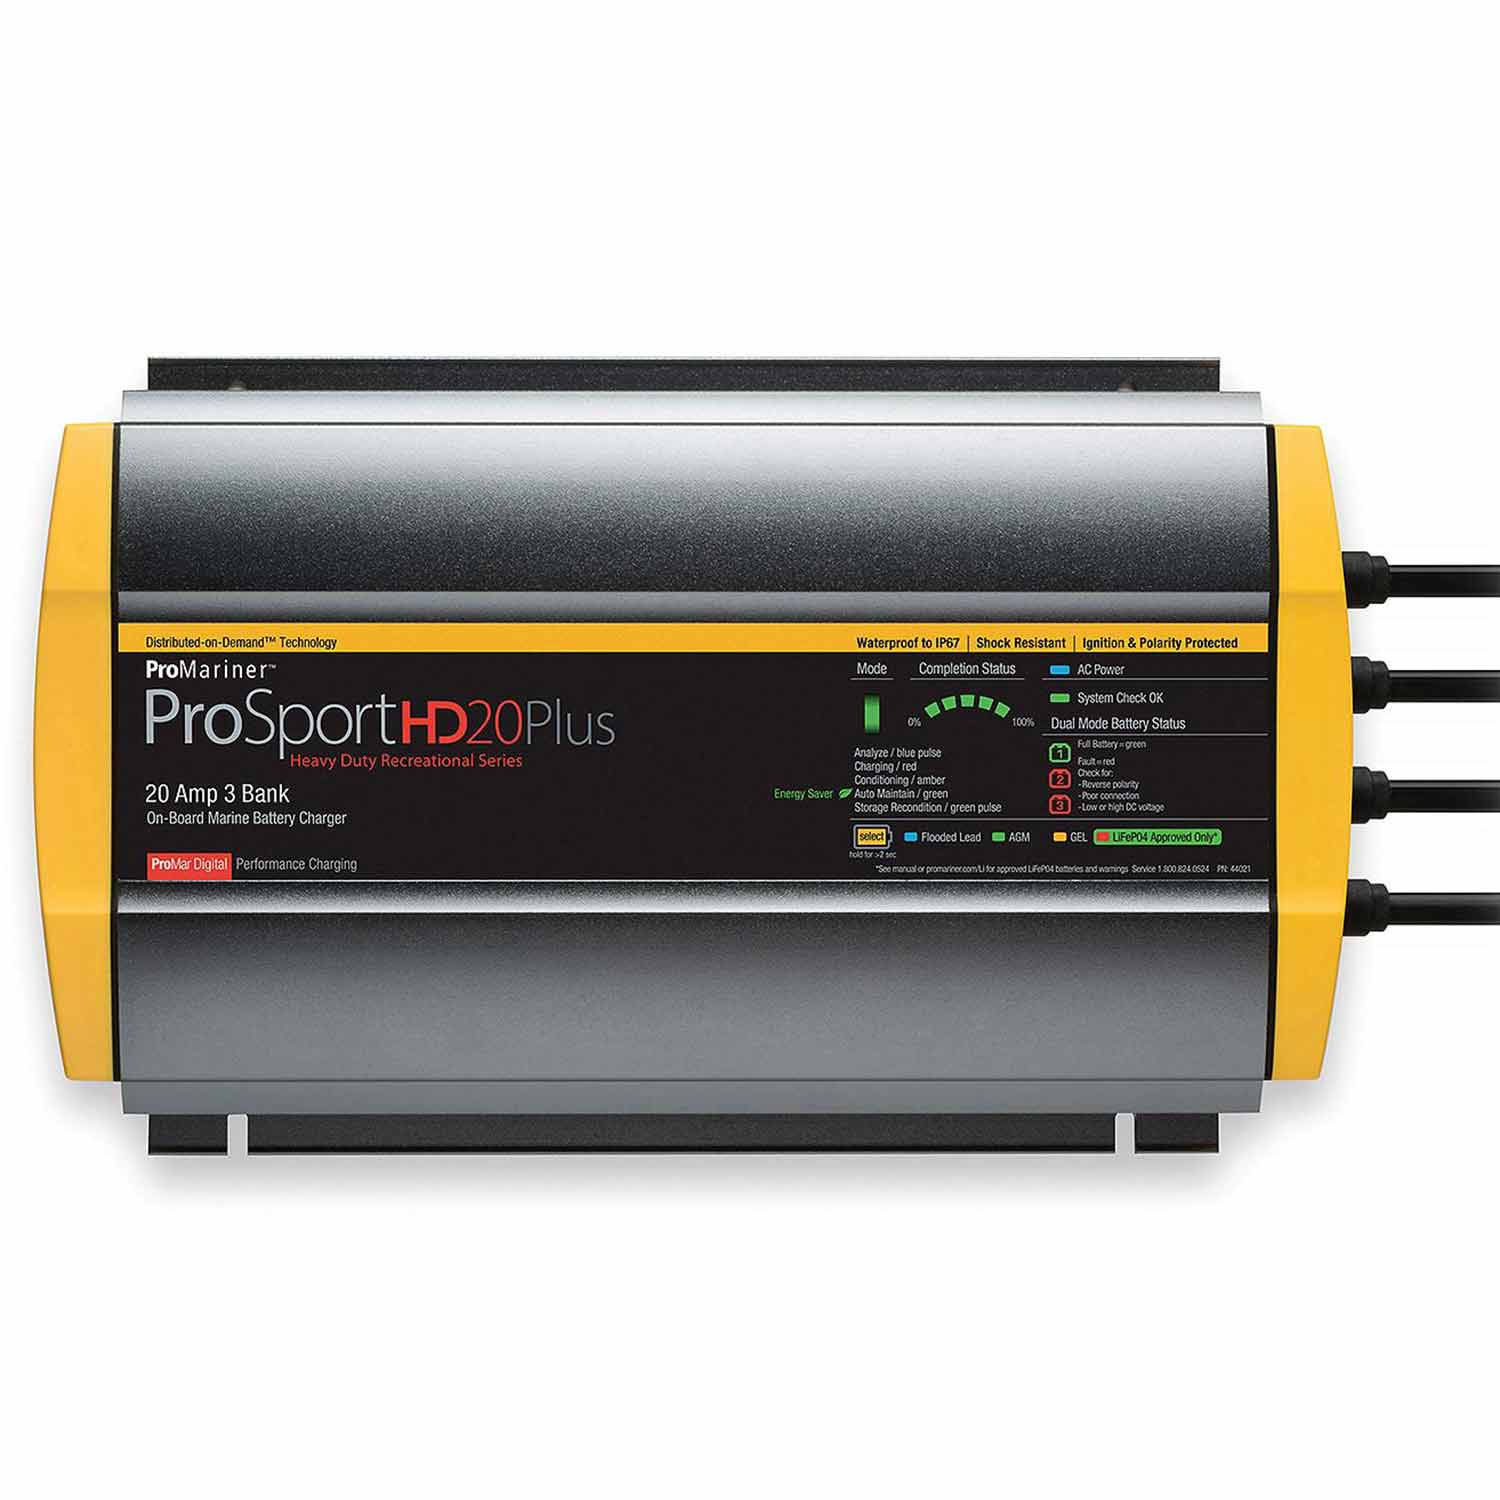 PROMARINER ProSportHD20 Plus Onboard Marine Battery Charger, 20 Amp, 3-Bank